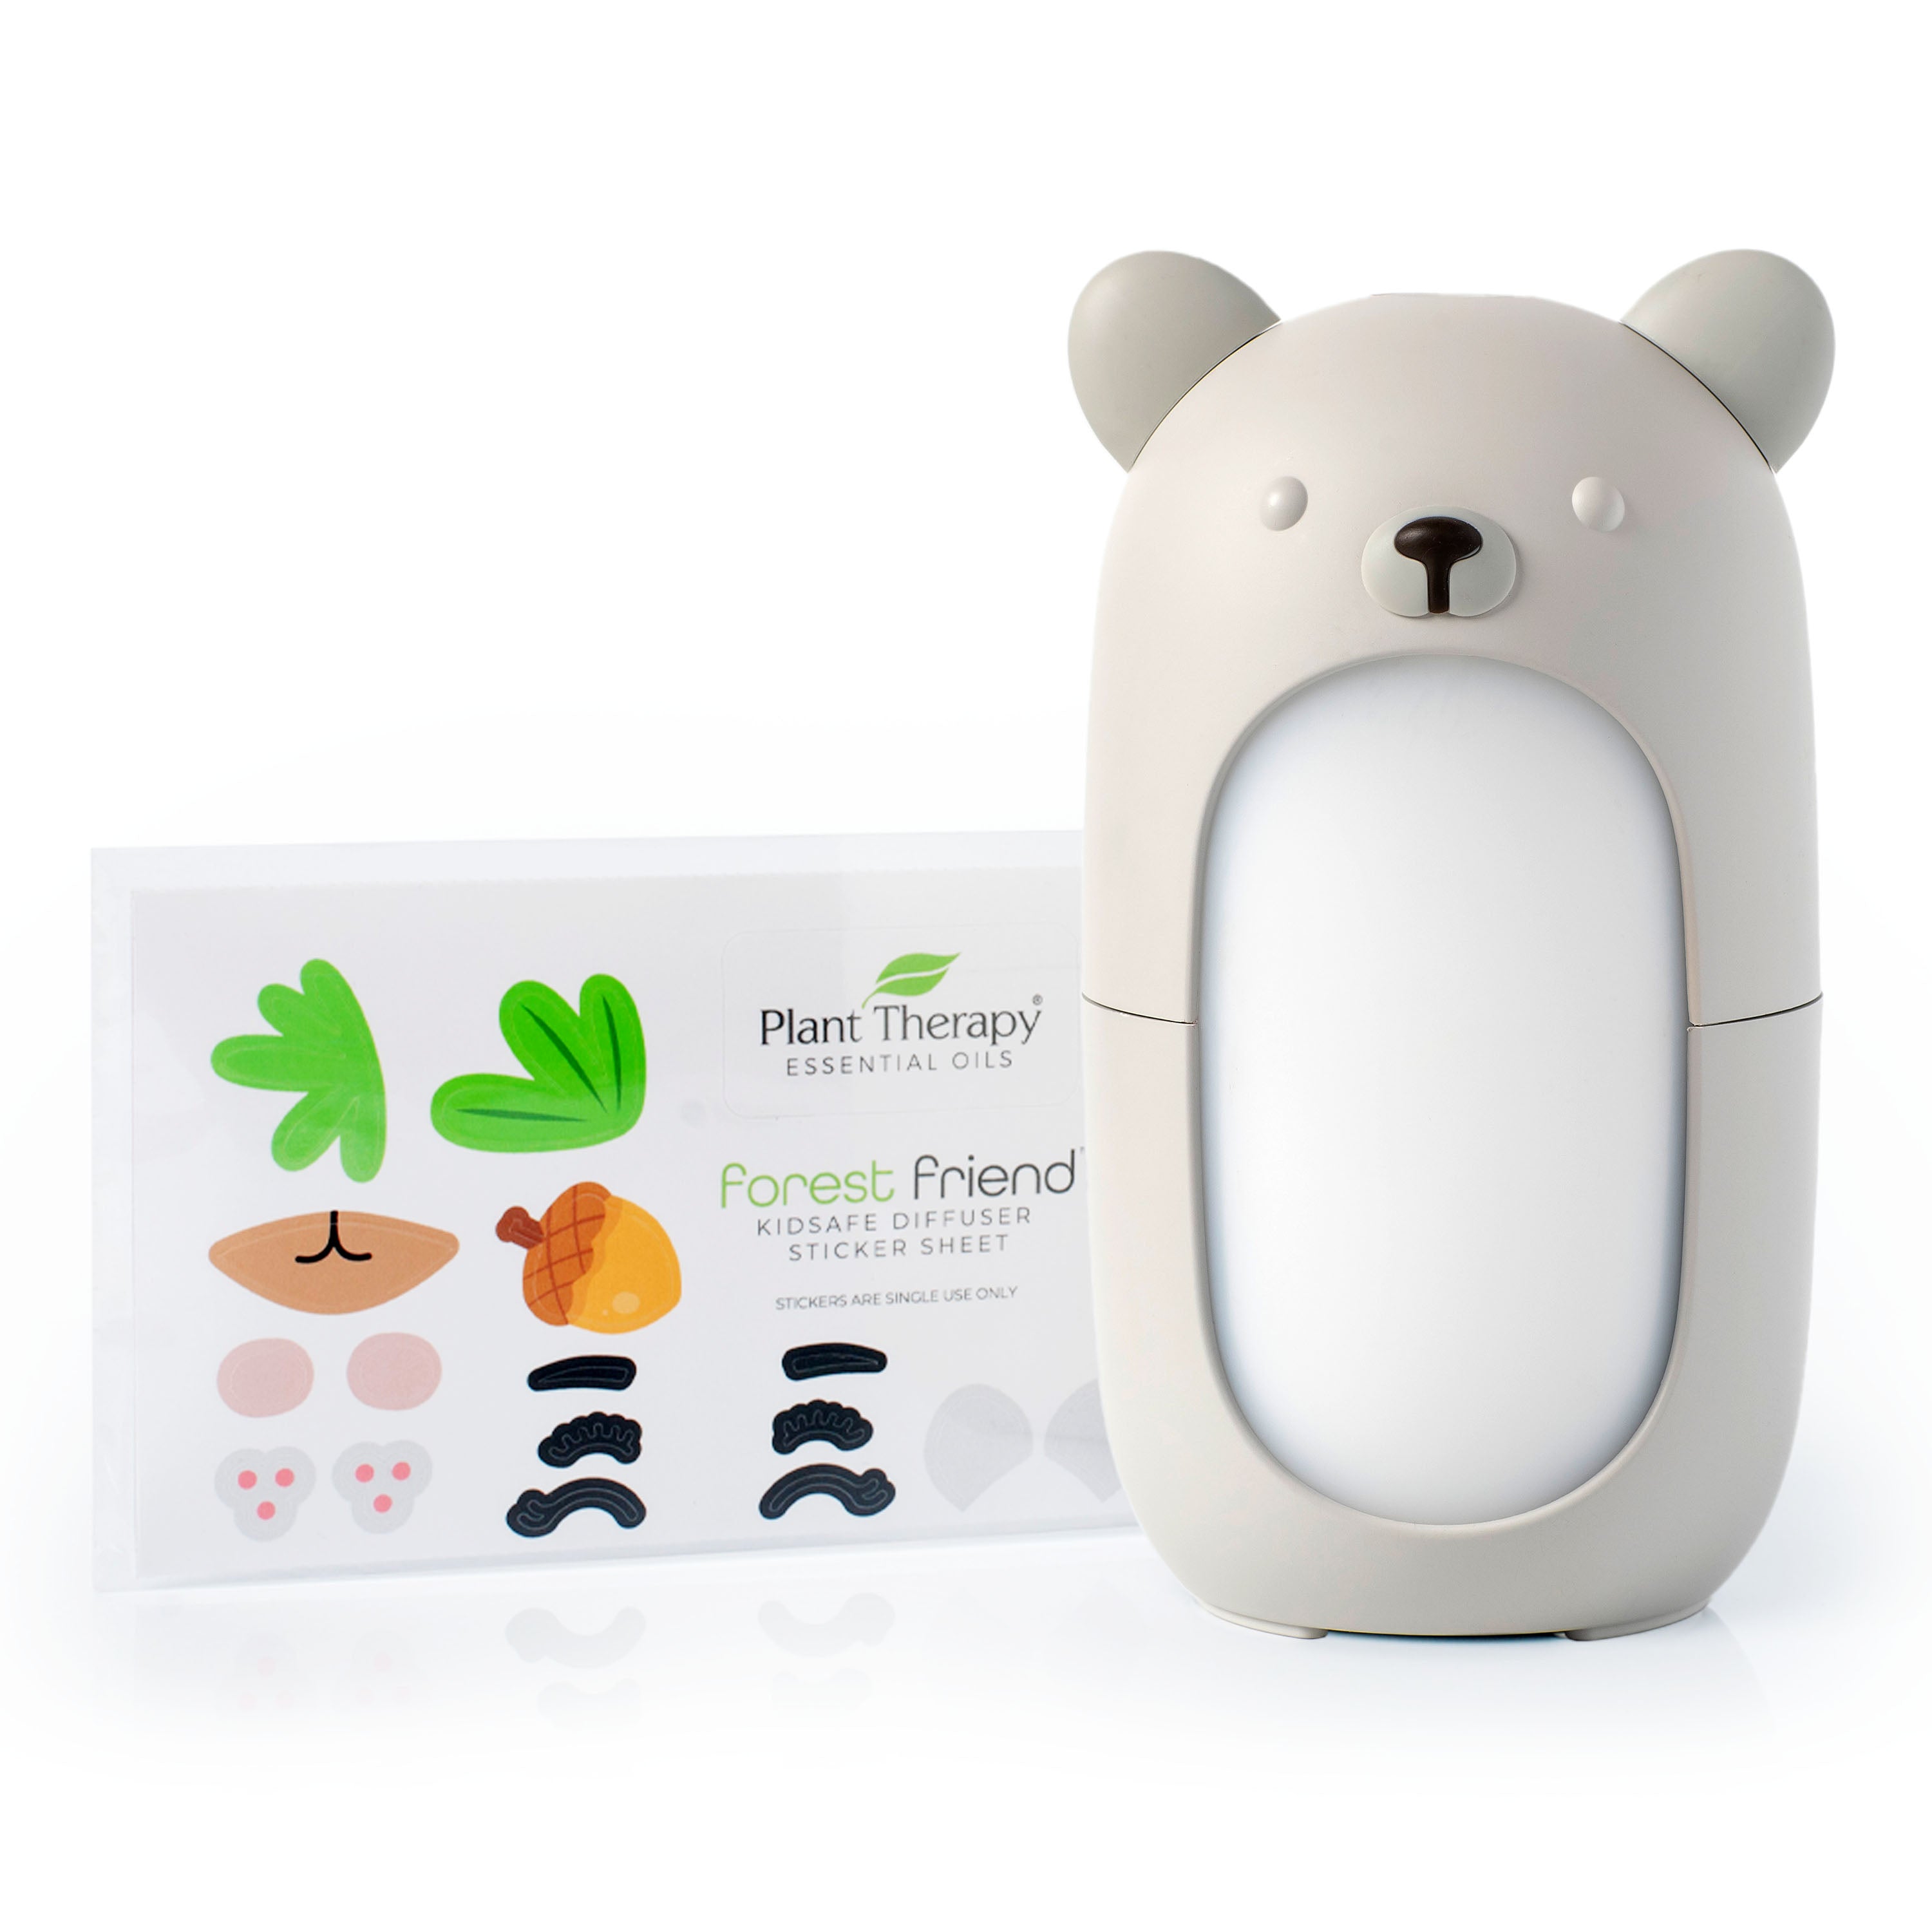 Forest Friend Diffuser with Sticker Sheet – Plant Therapy